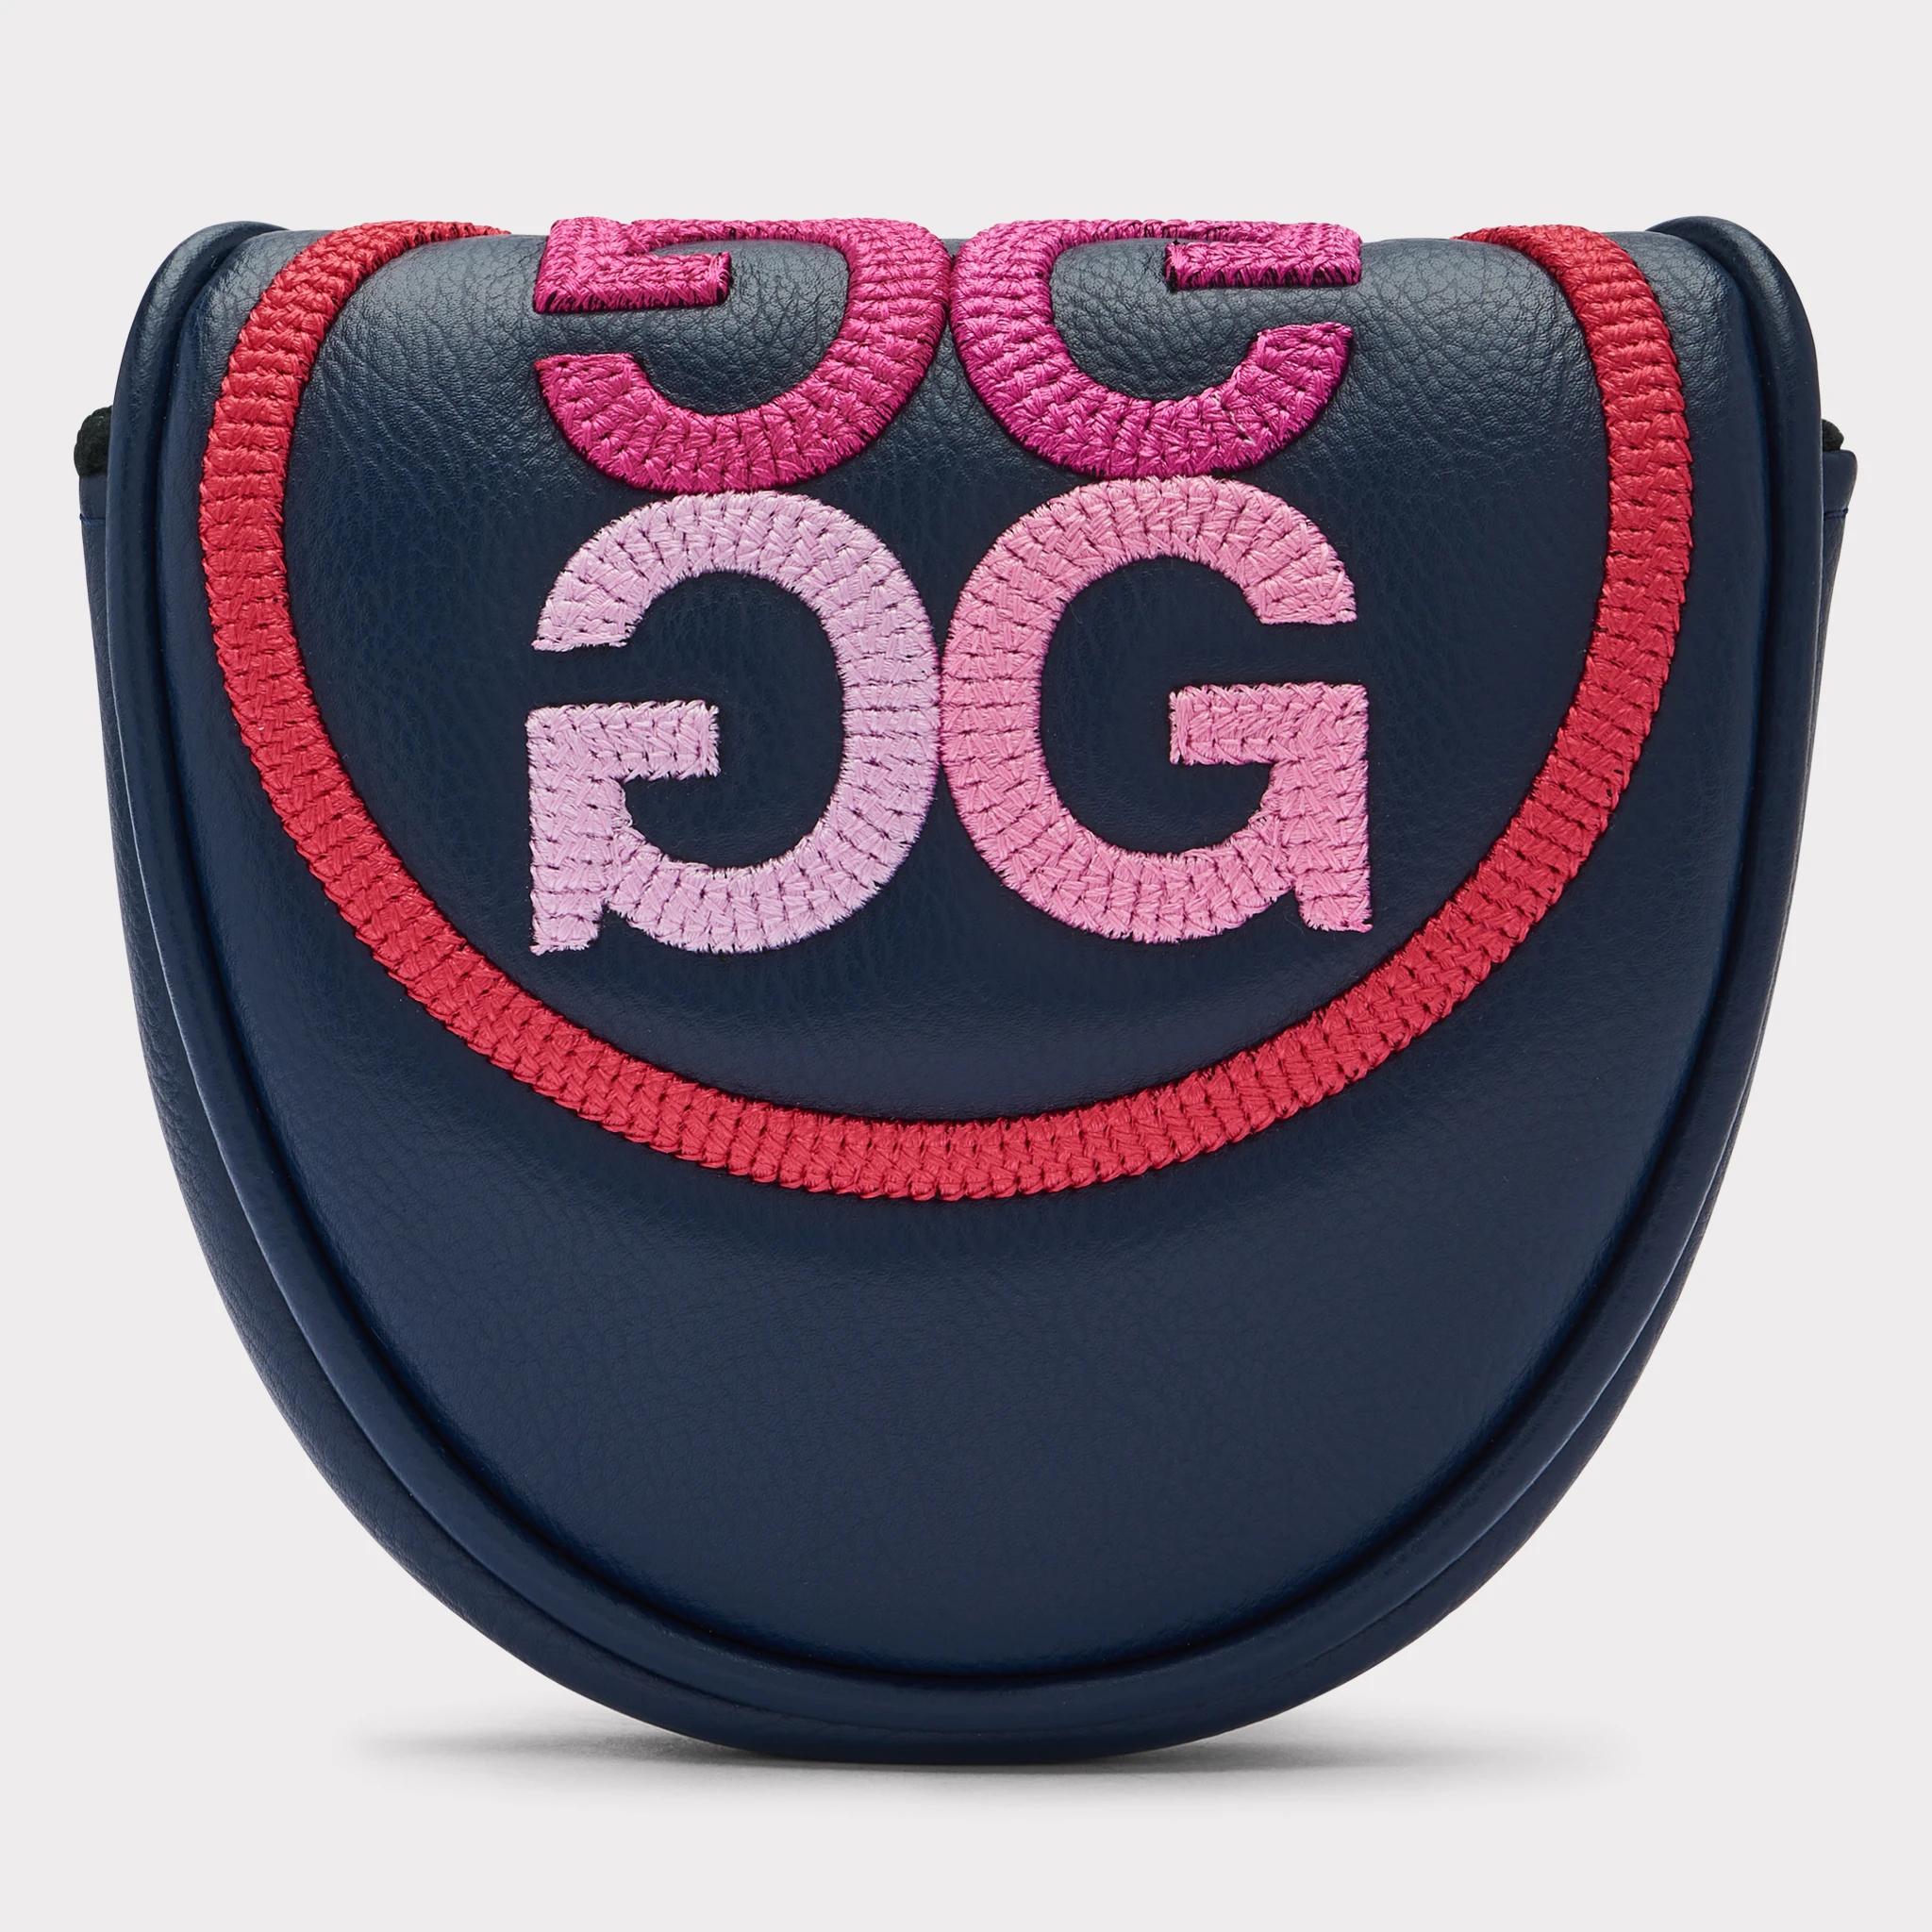 GRADIENT CIRCLE G'S VELOUR-LINED BLADE PUTTER COVER